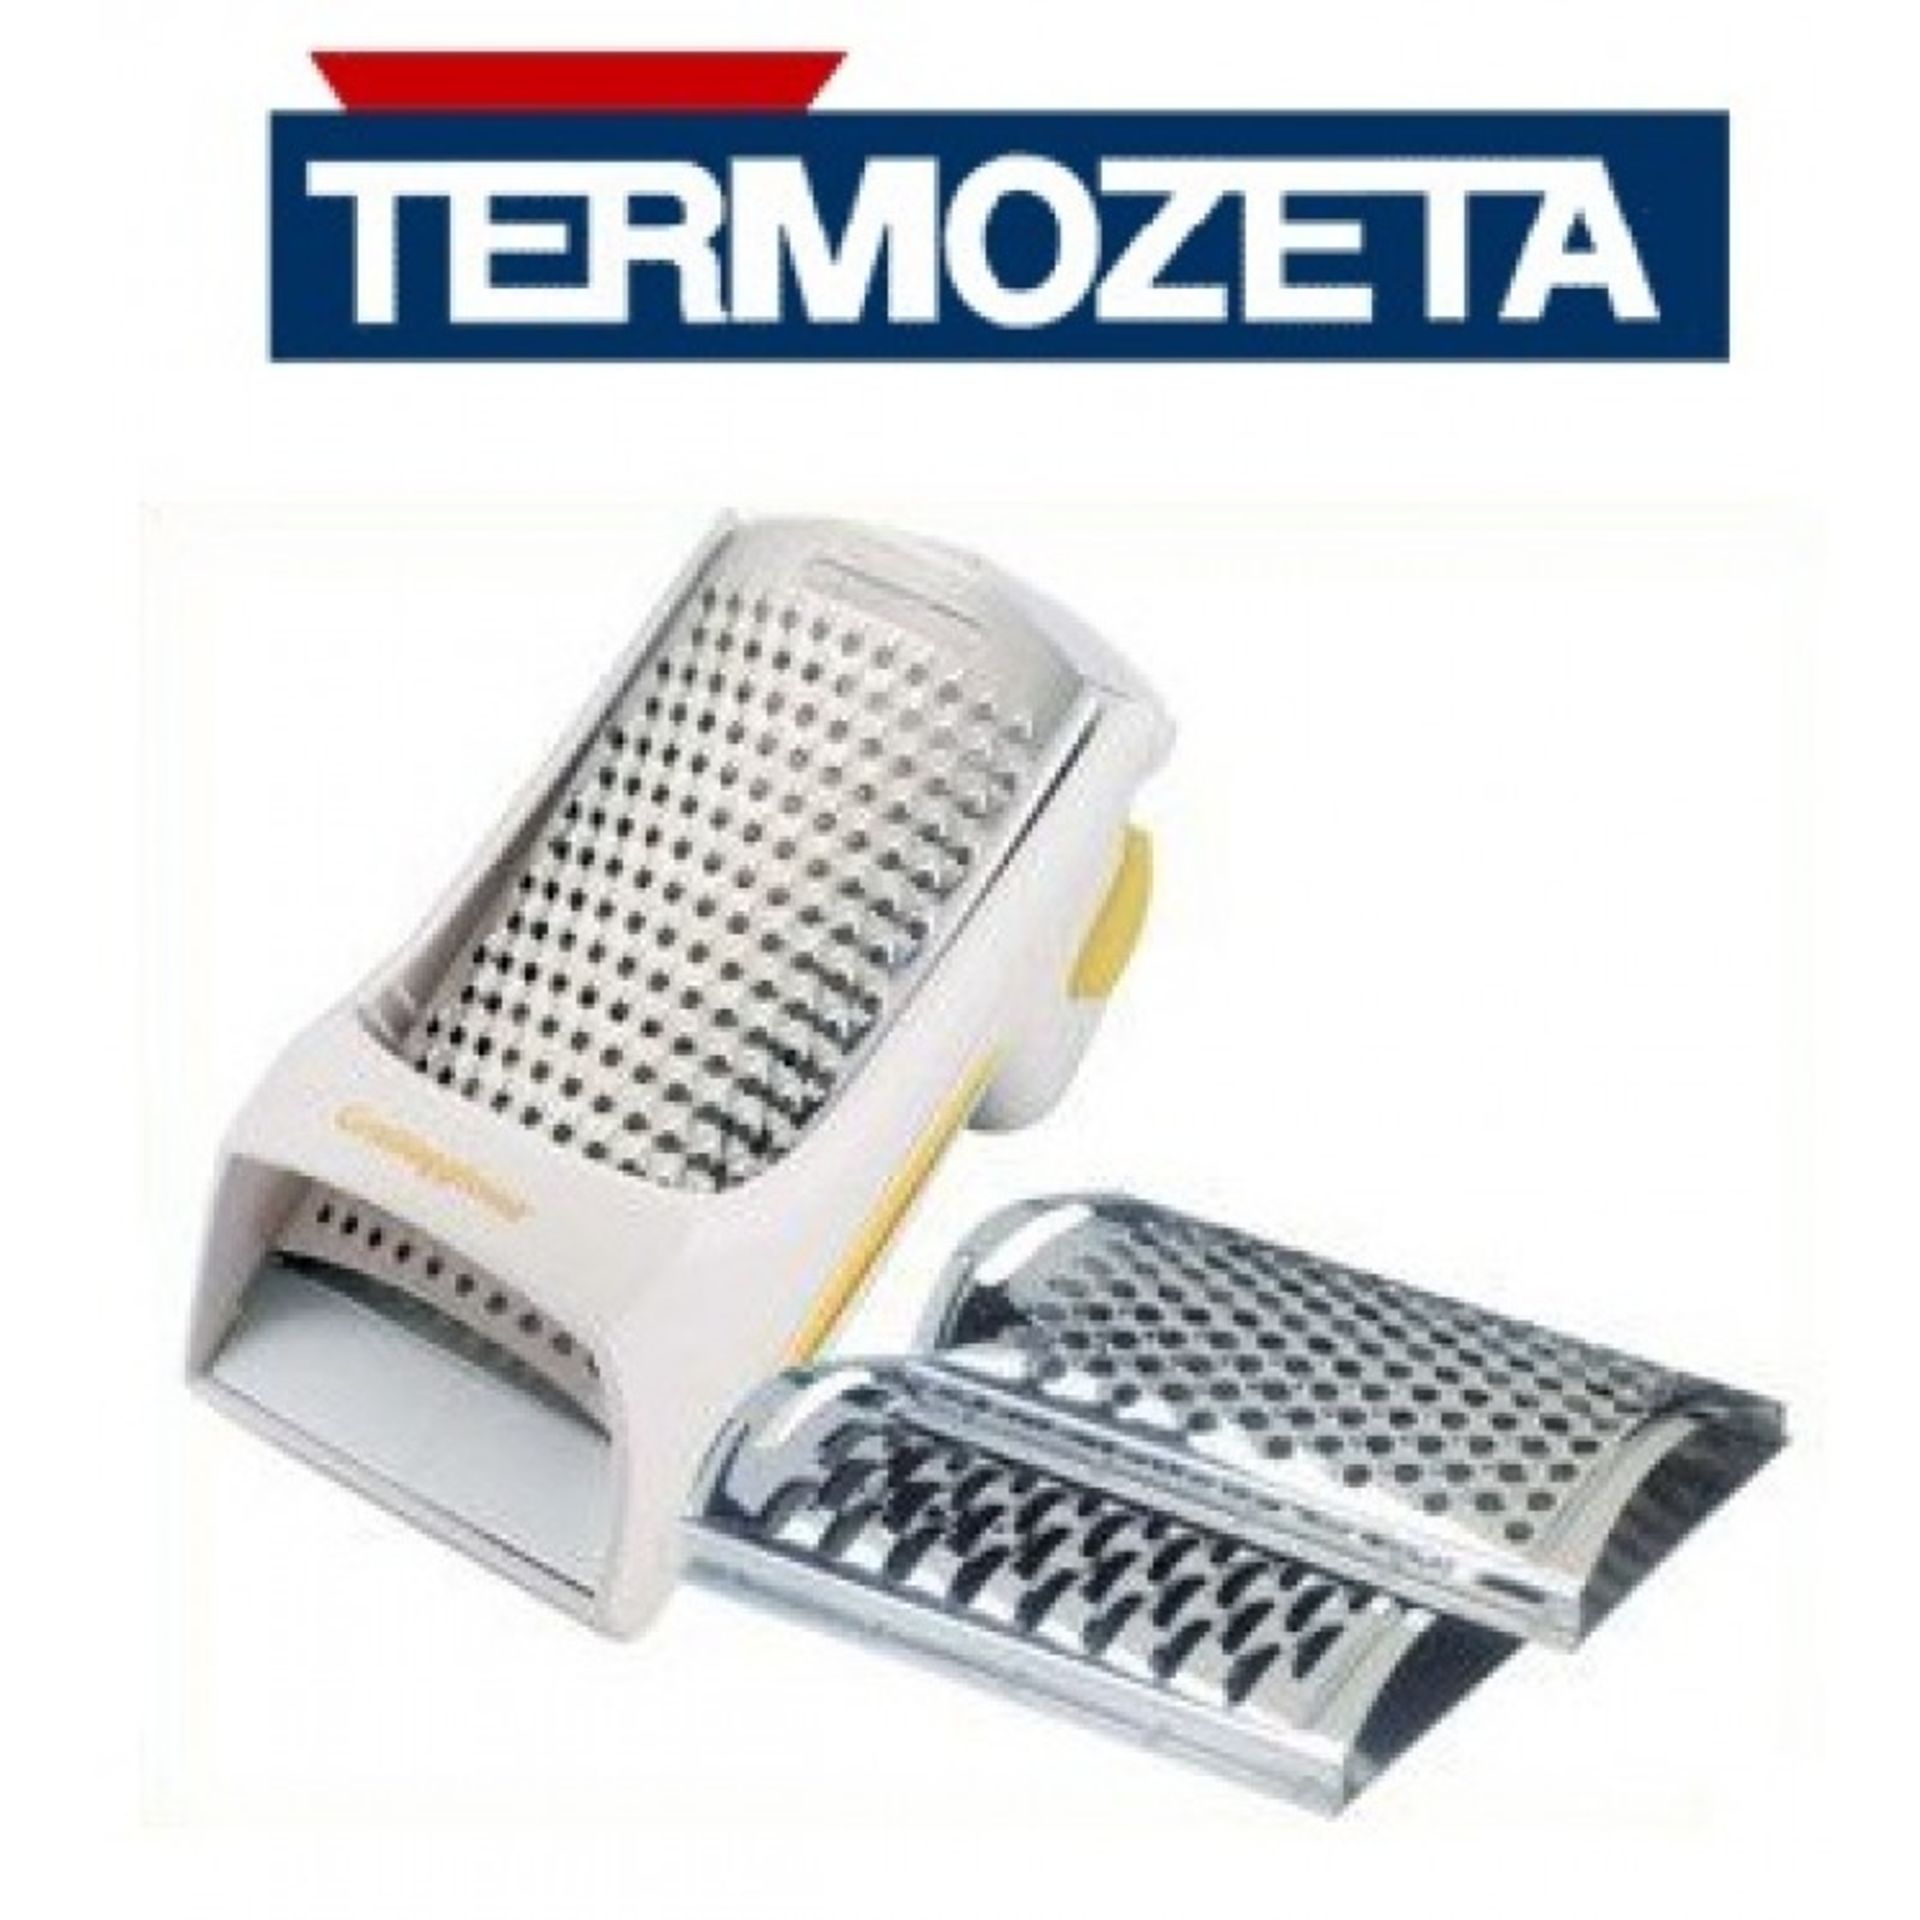 V Grade A Termozeta Rechargeable Cheese Grater-Stainless Steel Blade-Easy Clean-Size 18.5 X 8.5 X - Image 3 of 4